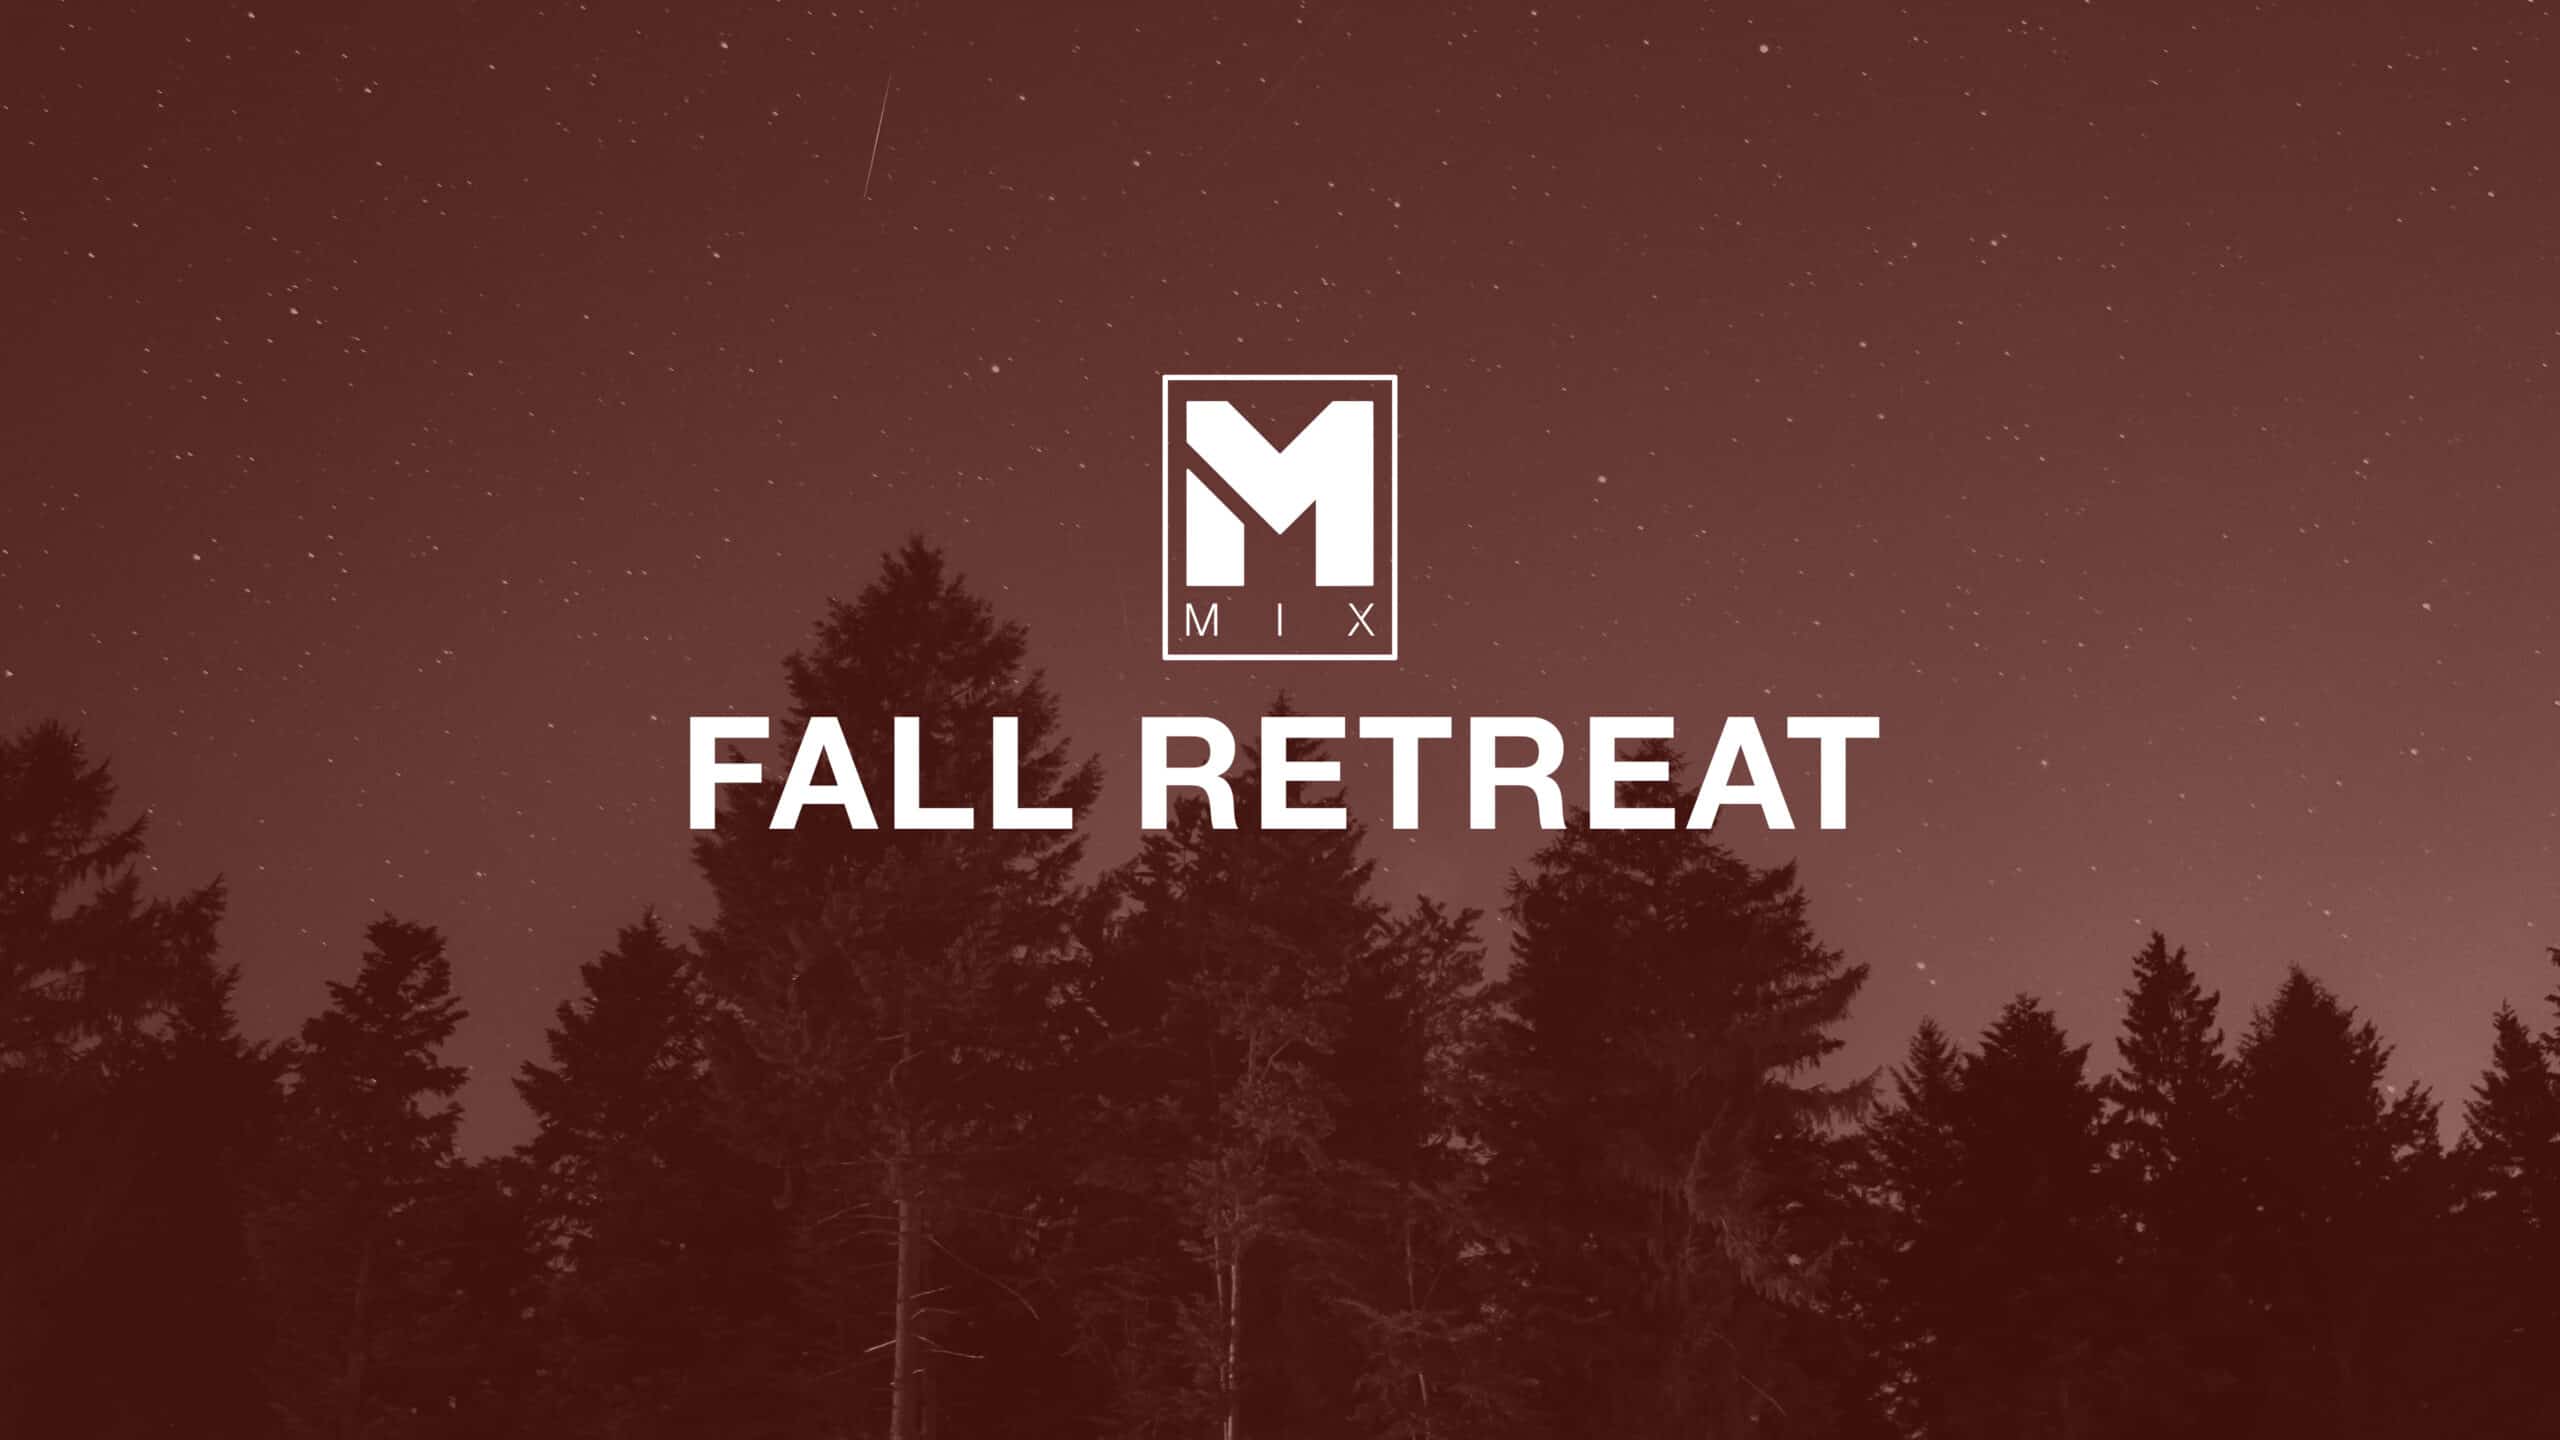 Trees with stars over head - logo for Mix Fall Retreat